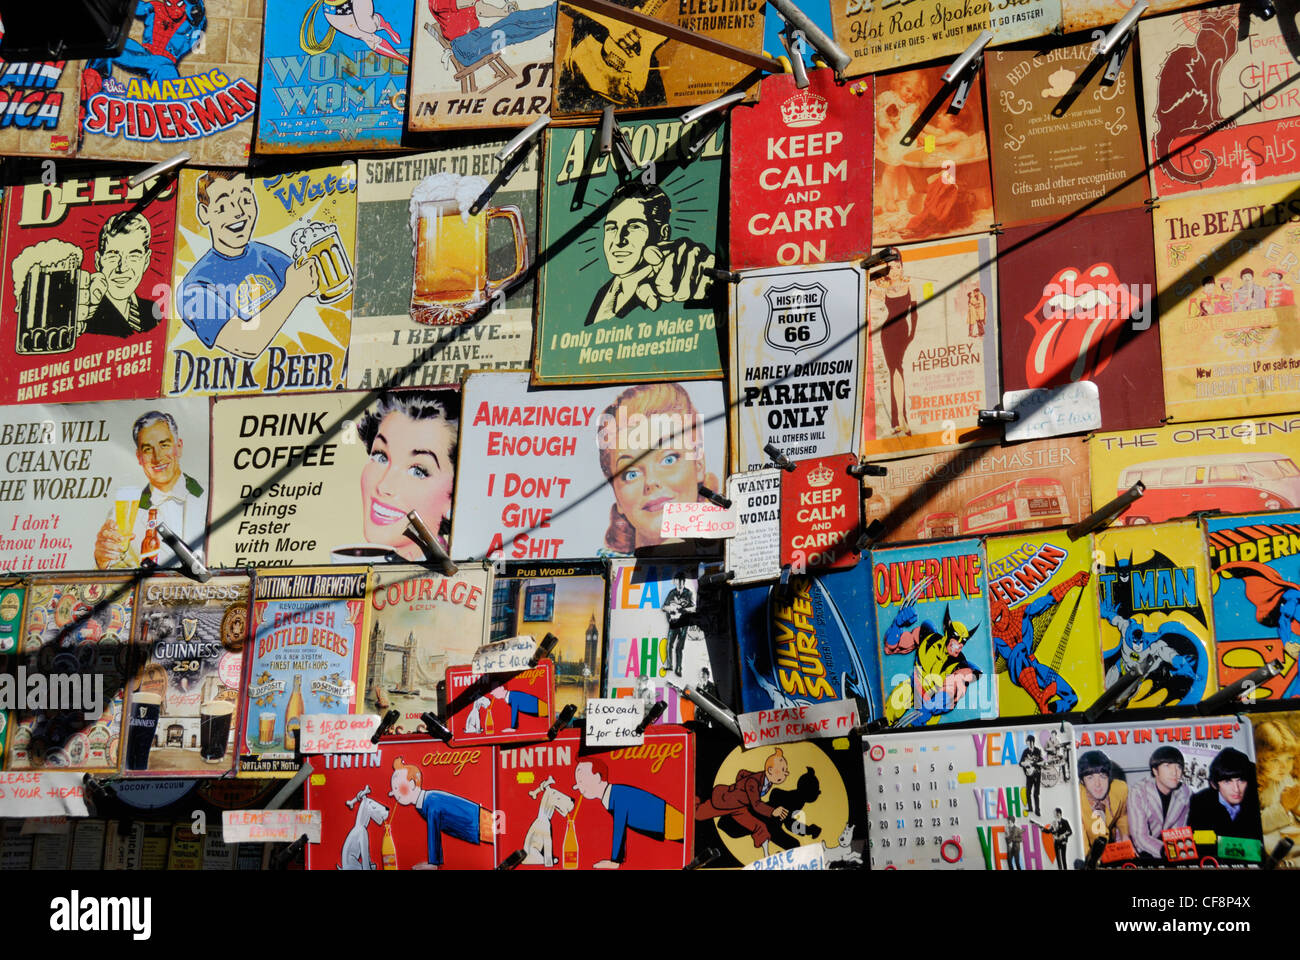 Vintage-style metal signs on a souvenir stall Stock Photo